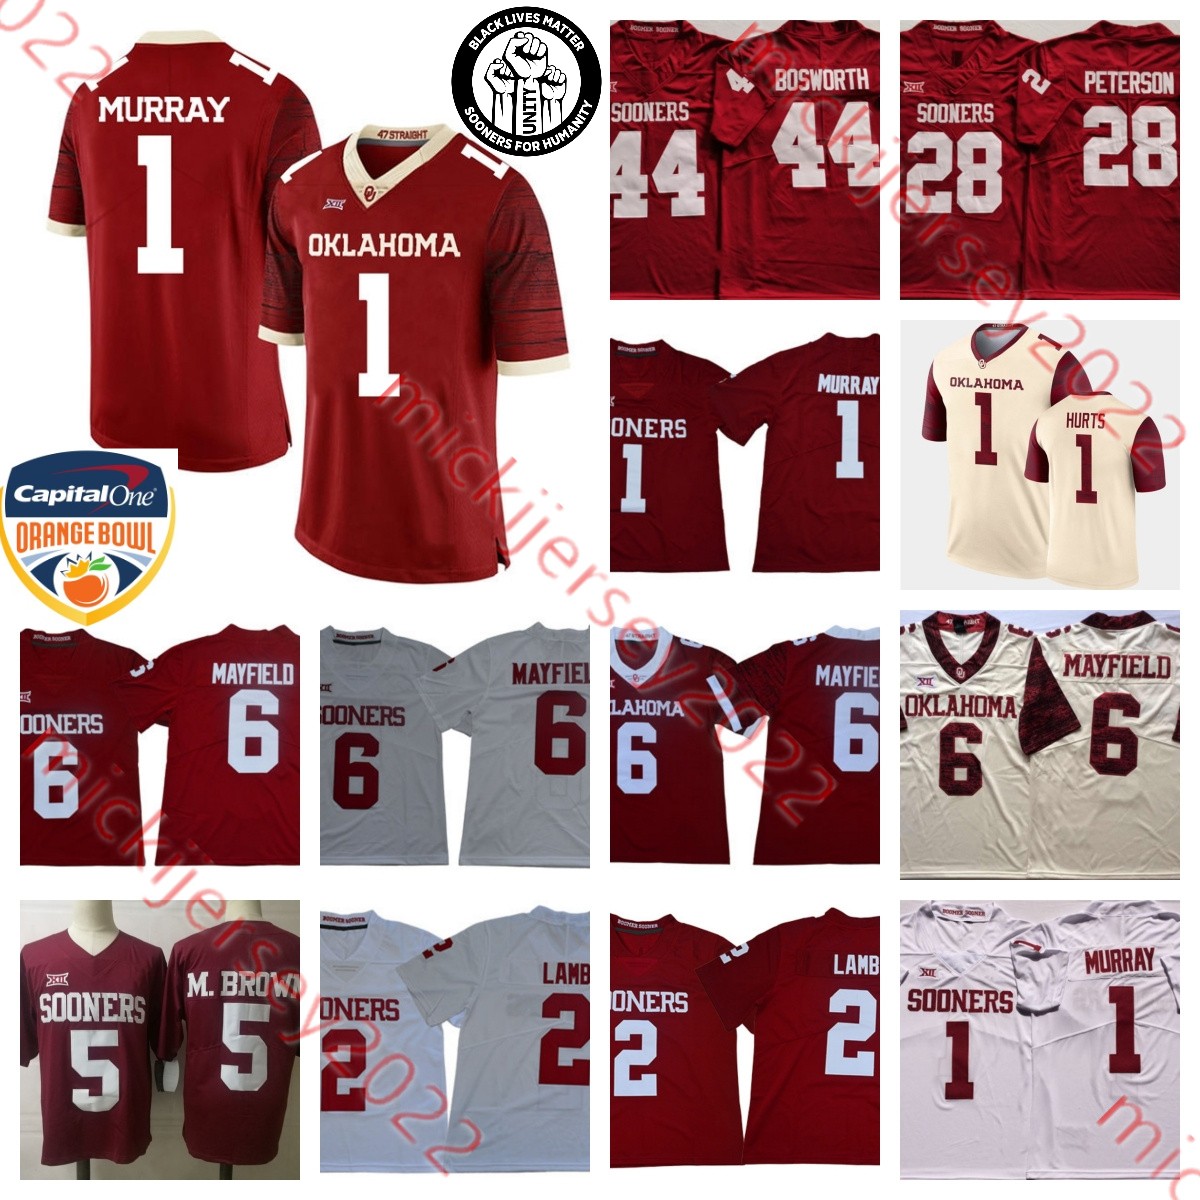 

Mens Stitched Oklahoma Sooners college Football Jerseys 1 Kyler Murray Baker Mayfield Jalen Hurts CeeDee Lamb Marquise Brown Adrian Peterson Brian Bosworth Jersey, White/2 ceedee lamb